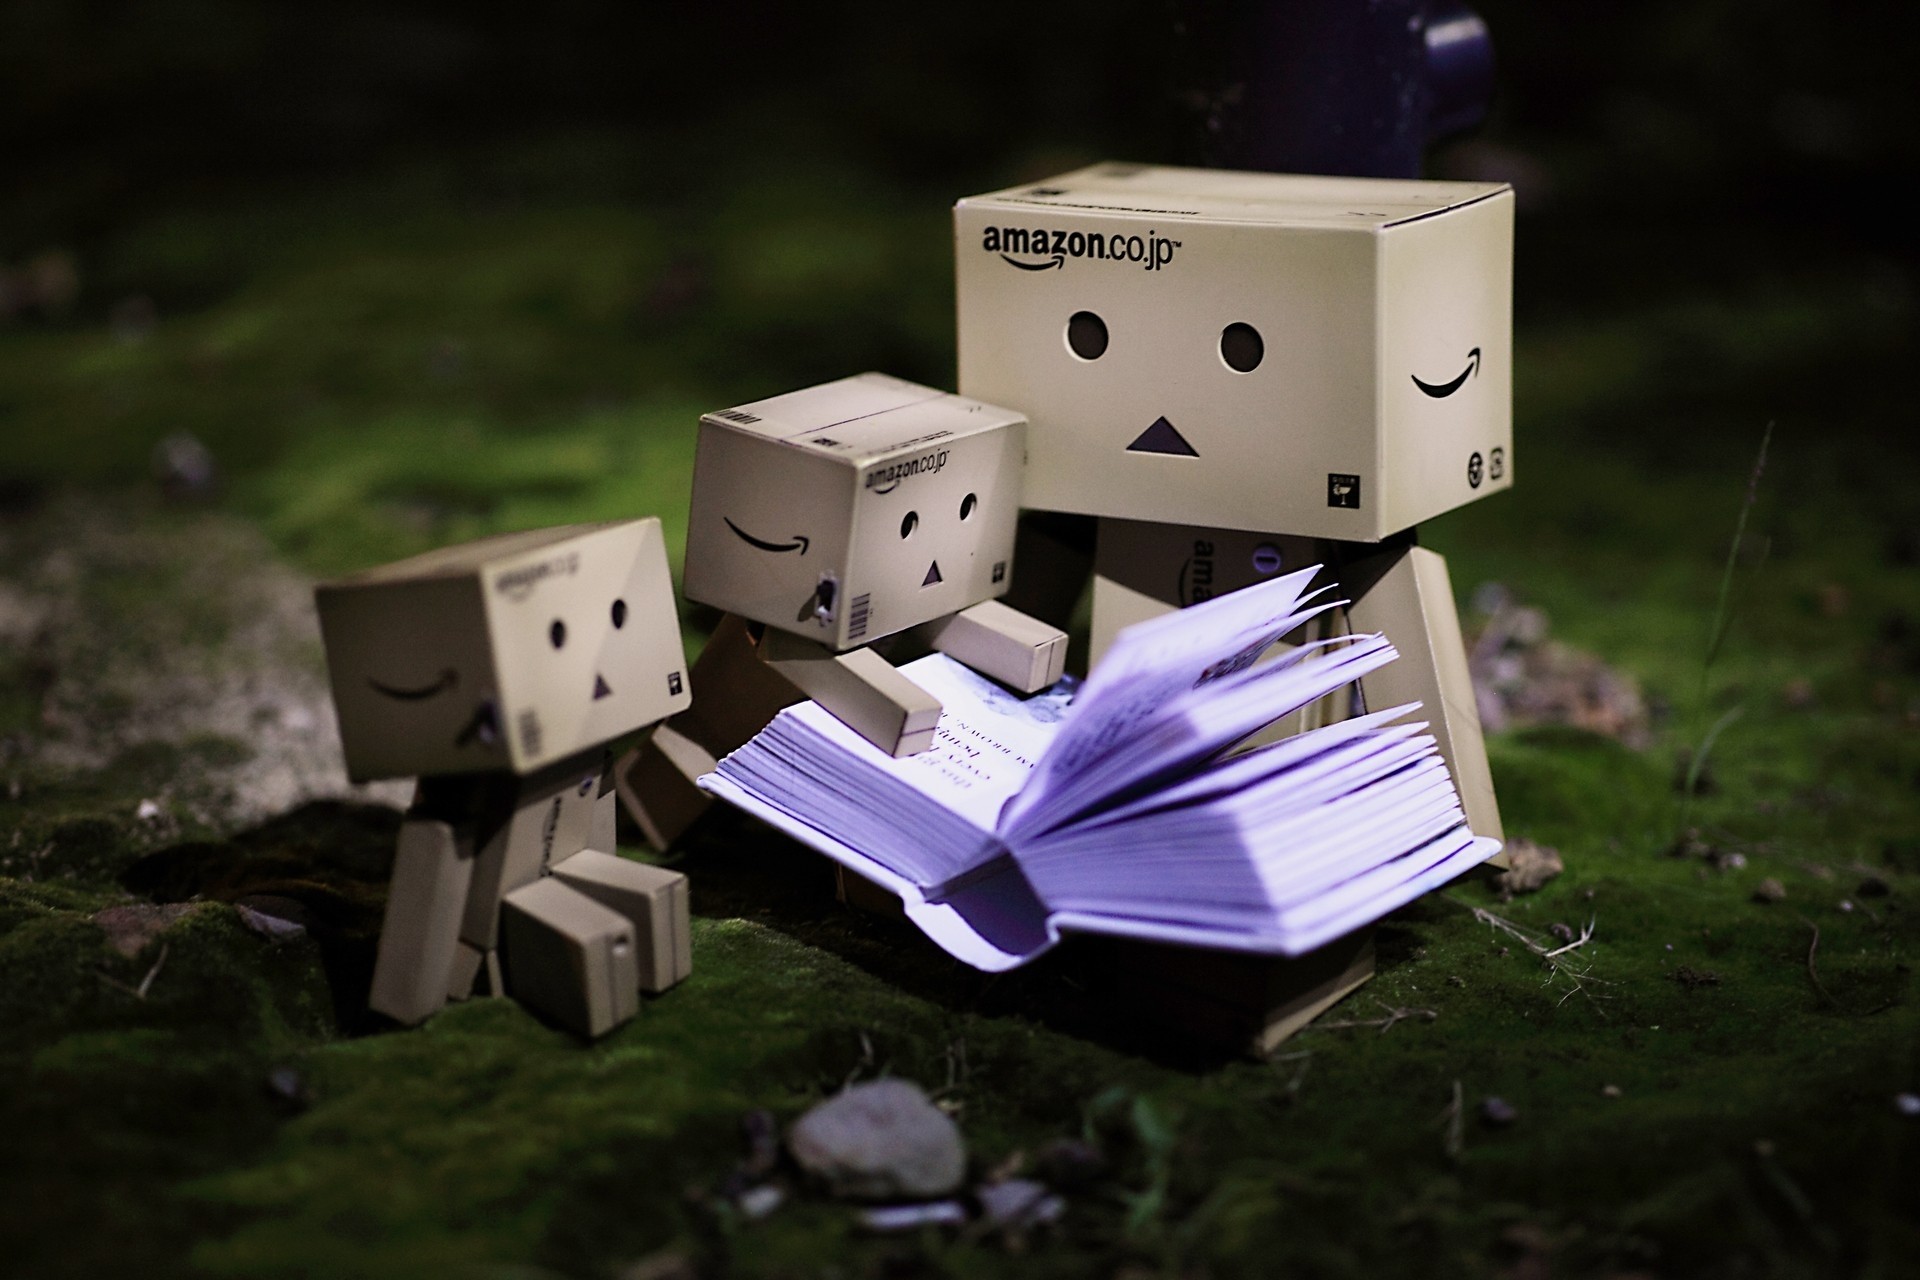 reading, cardboard robot, miscellaneous, danbo collection of HD images